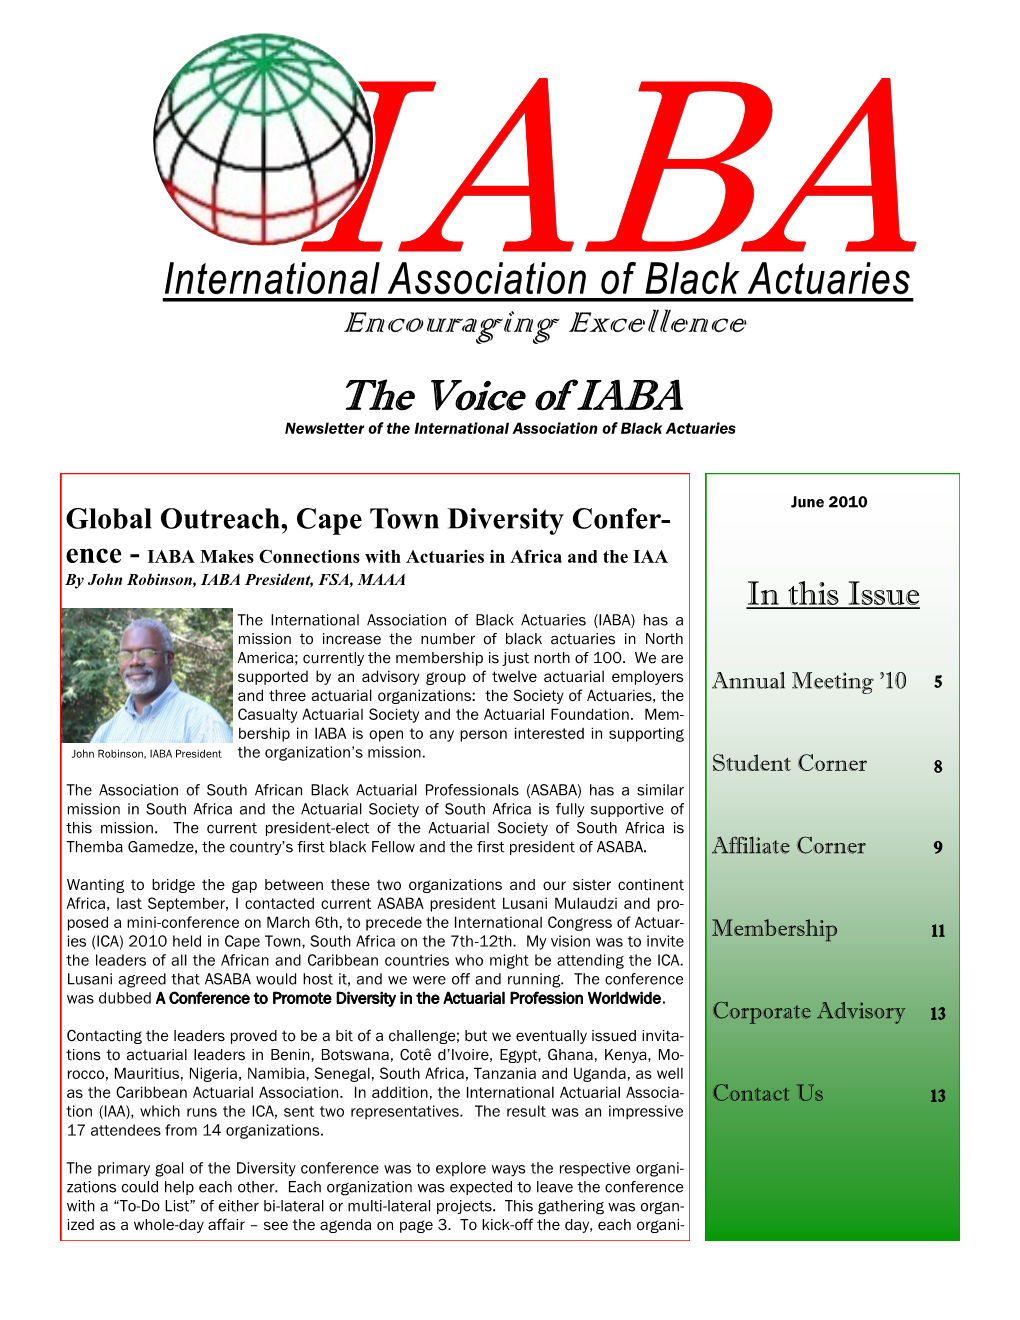 International Association of Black Actuaries the Voice of IABA